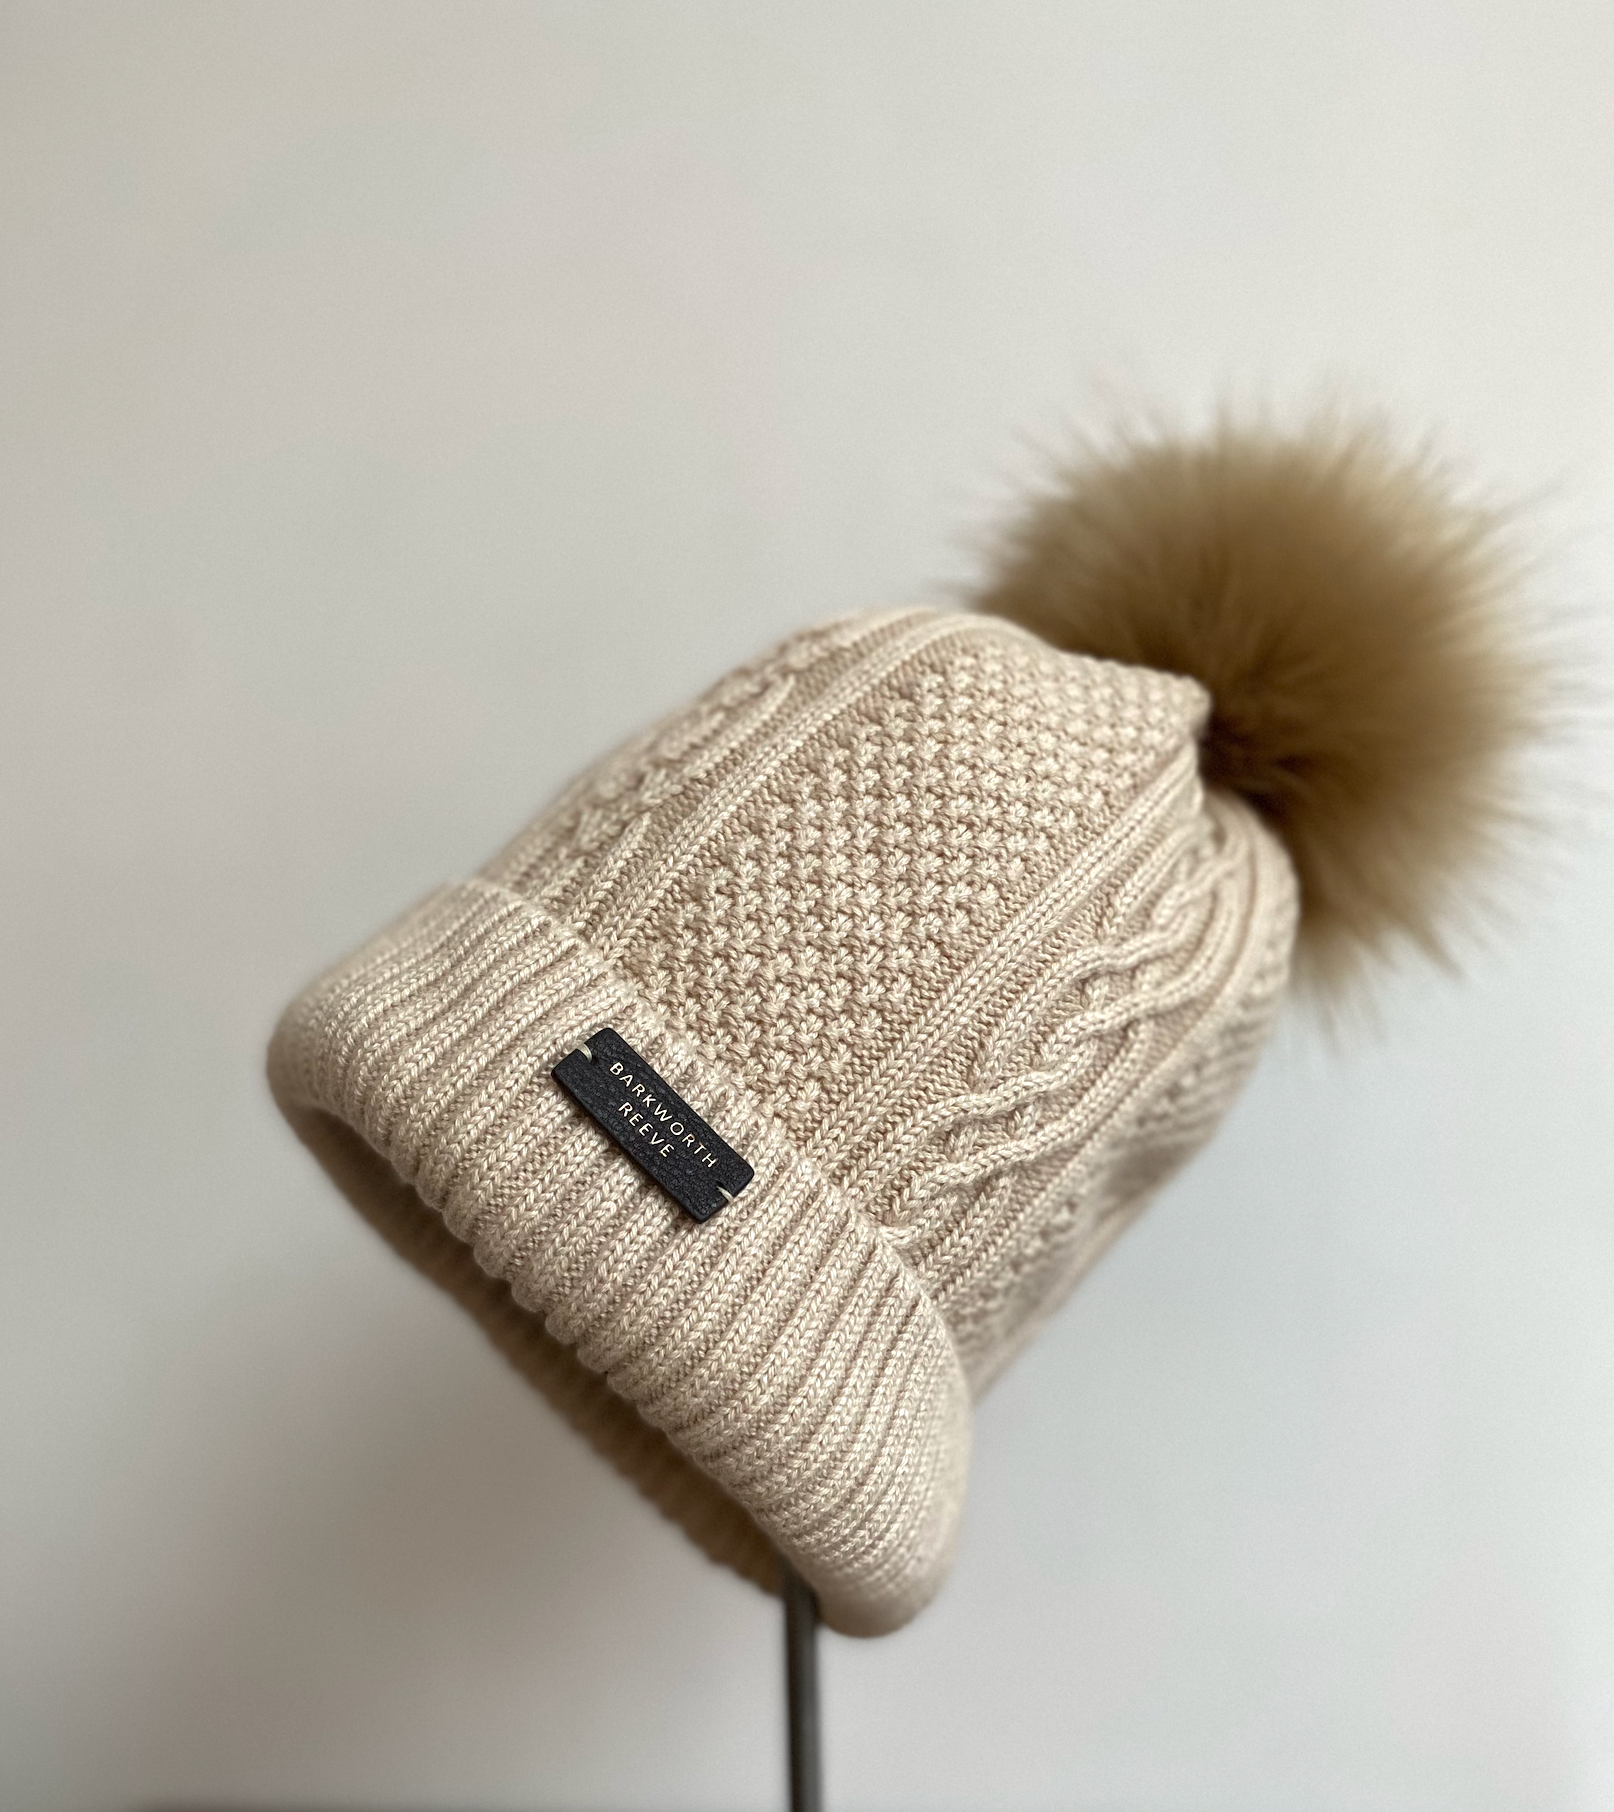 Knitted, Lined Bobble Hat in  Cream Cashmere, Wool & Cotton Mix Yarn